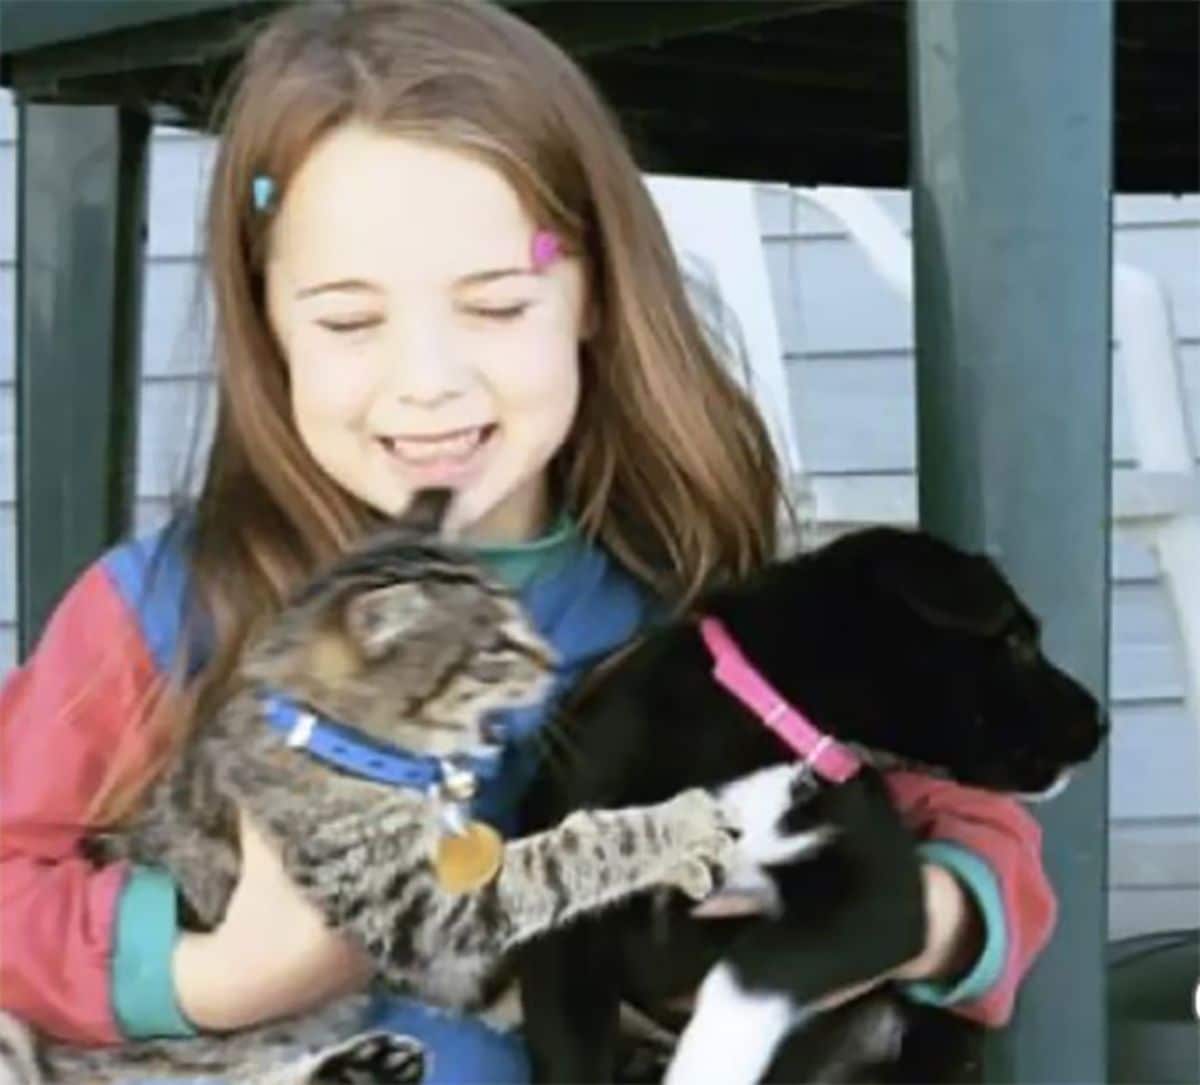 grey tabby cat attacking a black and white puppy with both being held by a little girl